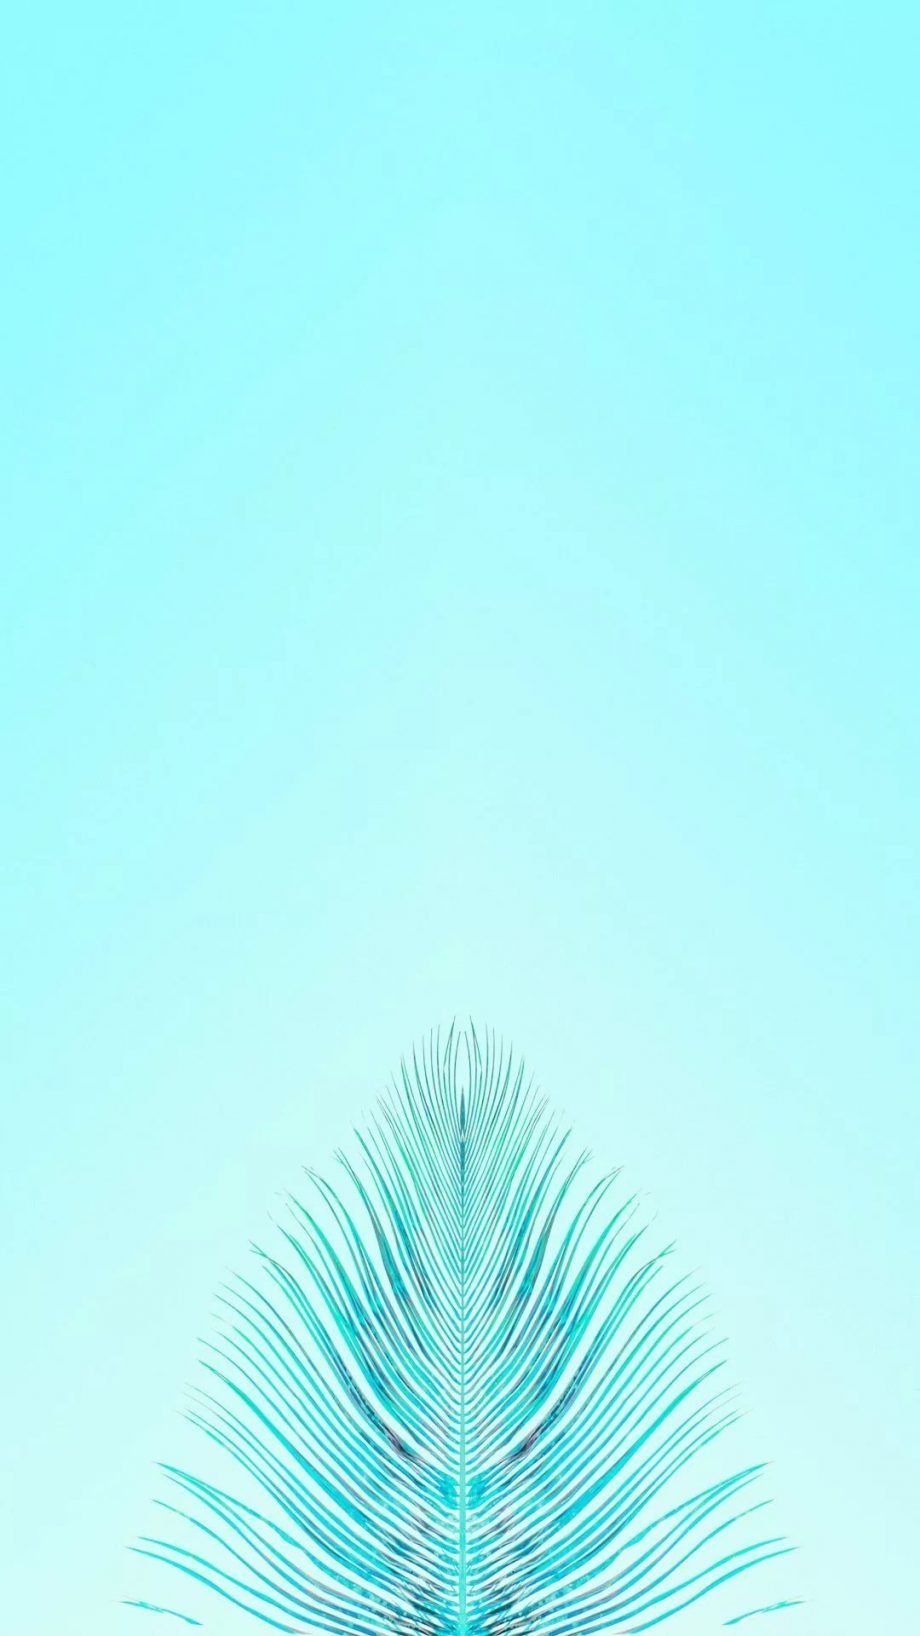 Сute Blue iPhone Wallpapers: 20+ Images - WallpaperBoat